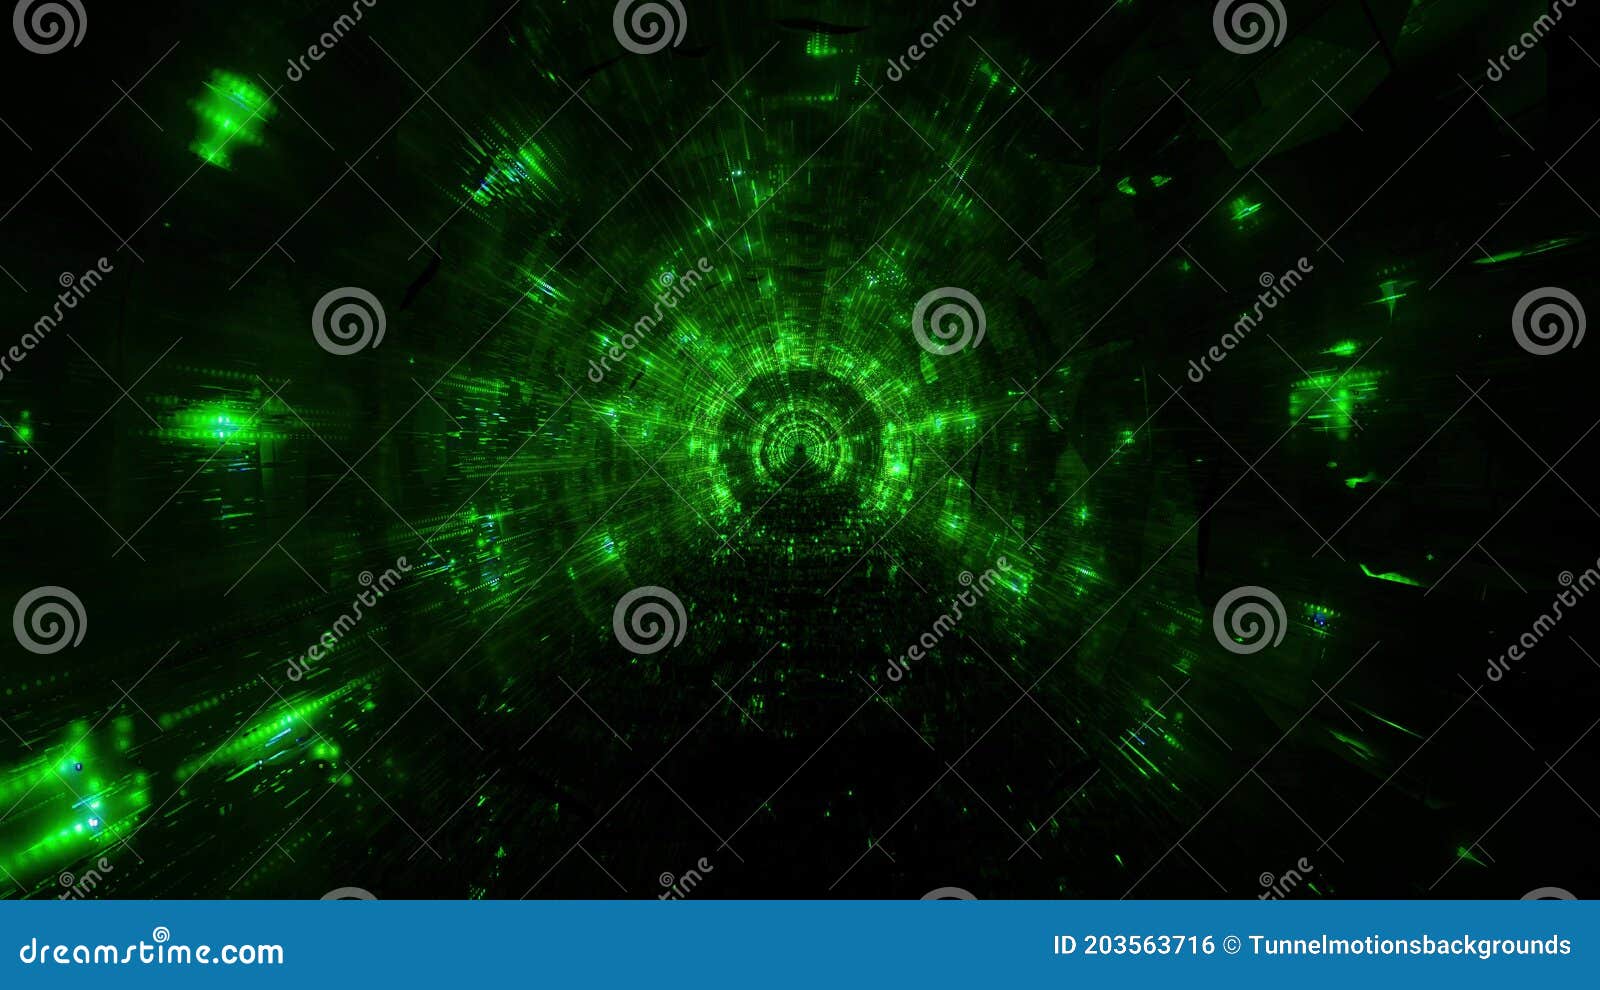 Green Hole Tunnel Vfx 3d Illustration Background Wallpaper Stock  Illustration - Illustration of fiction, space: 203563716